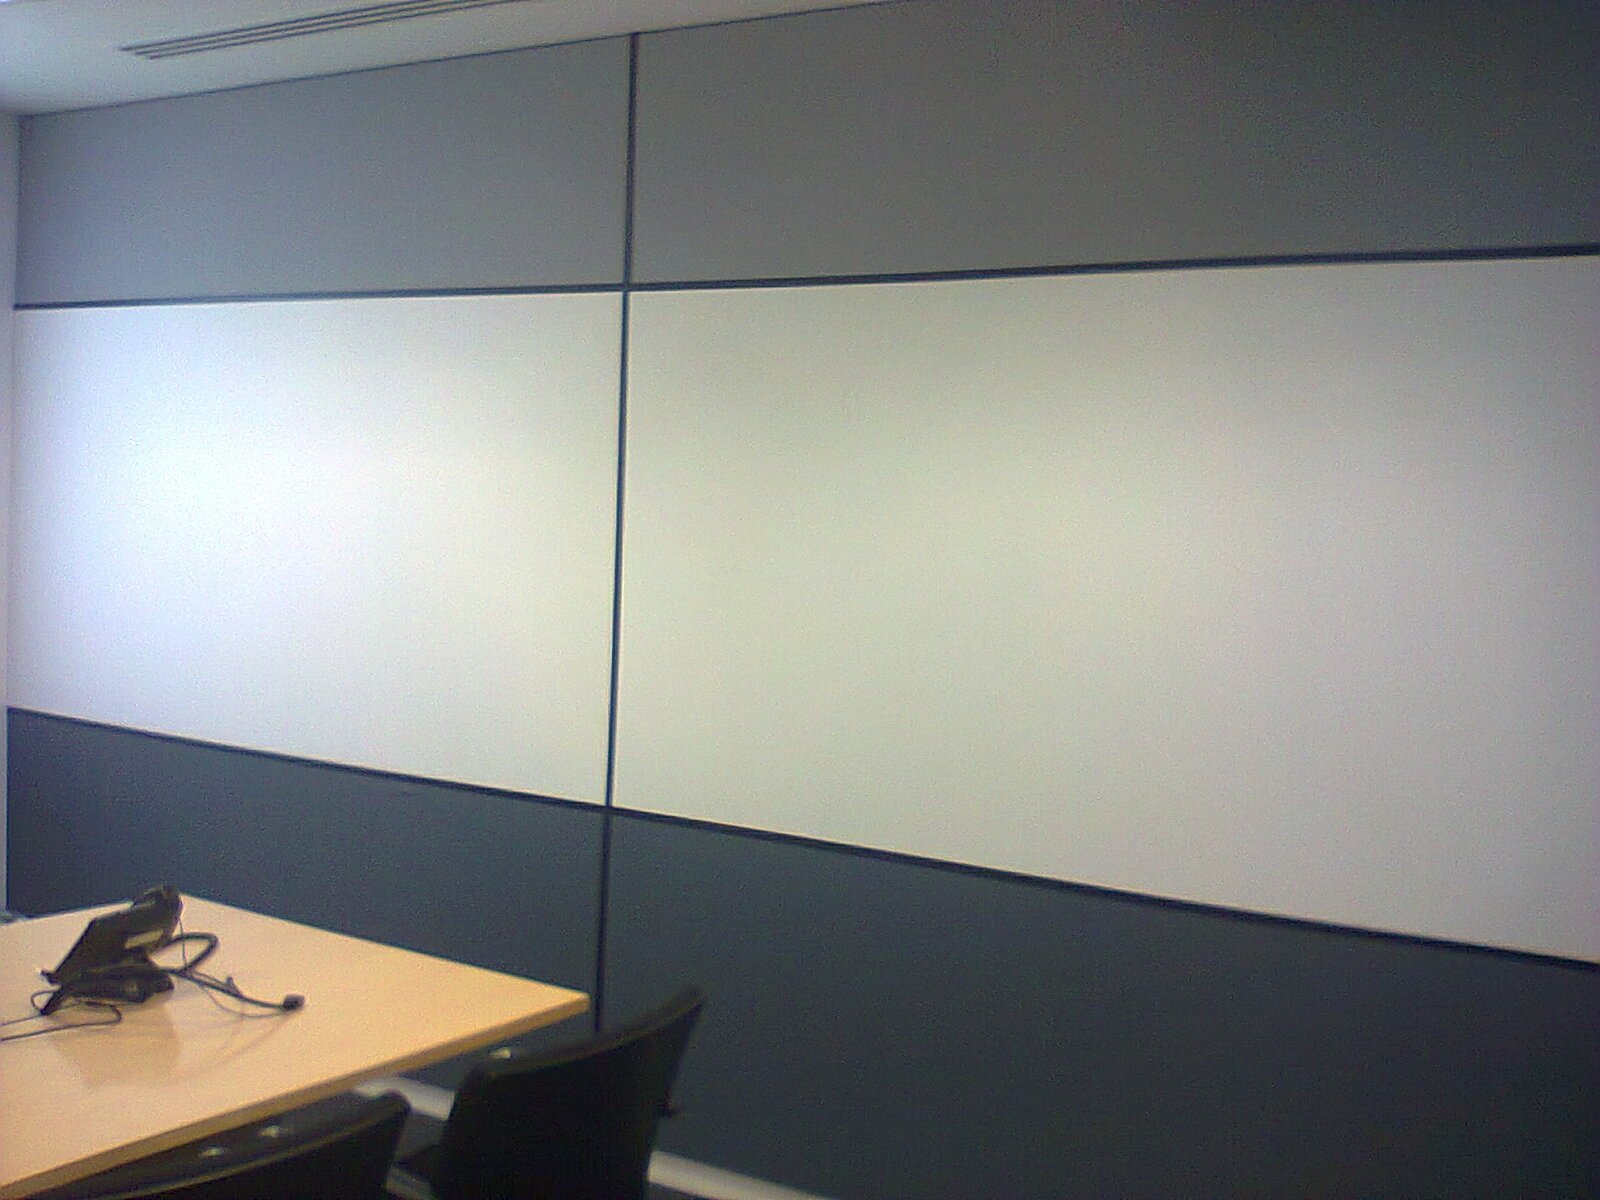 1" SoundControl Wall Mounted Acoustic Panel 2ft by 4ft - Advanced Acoustics